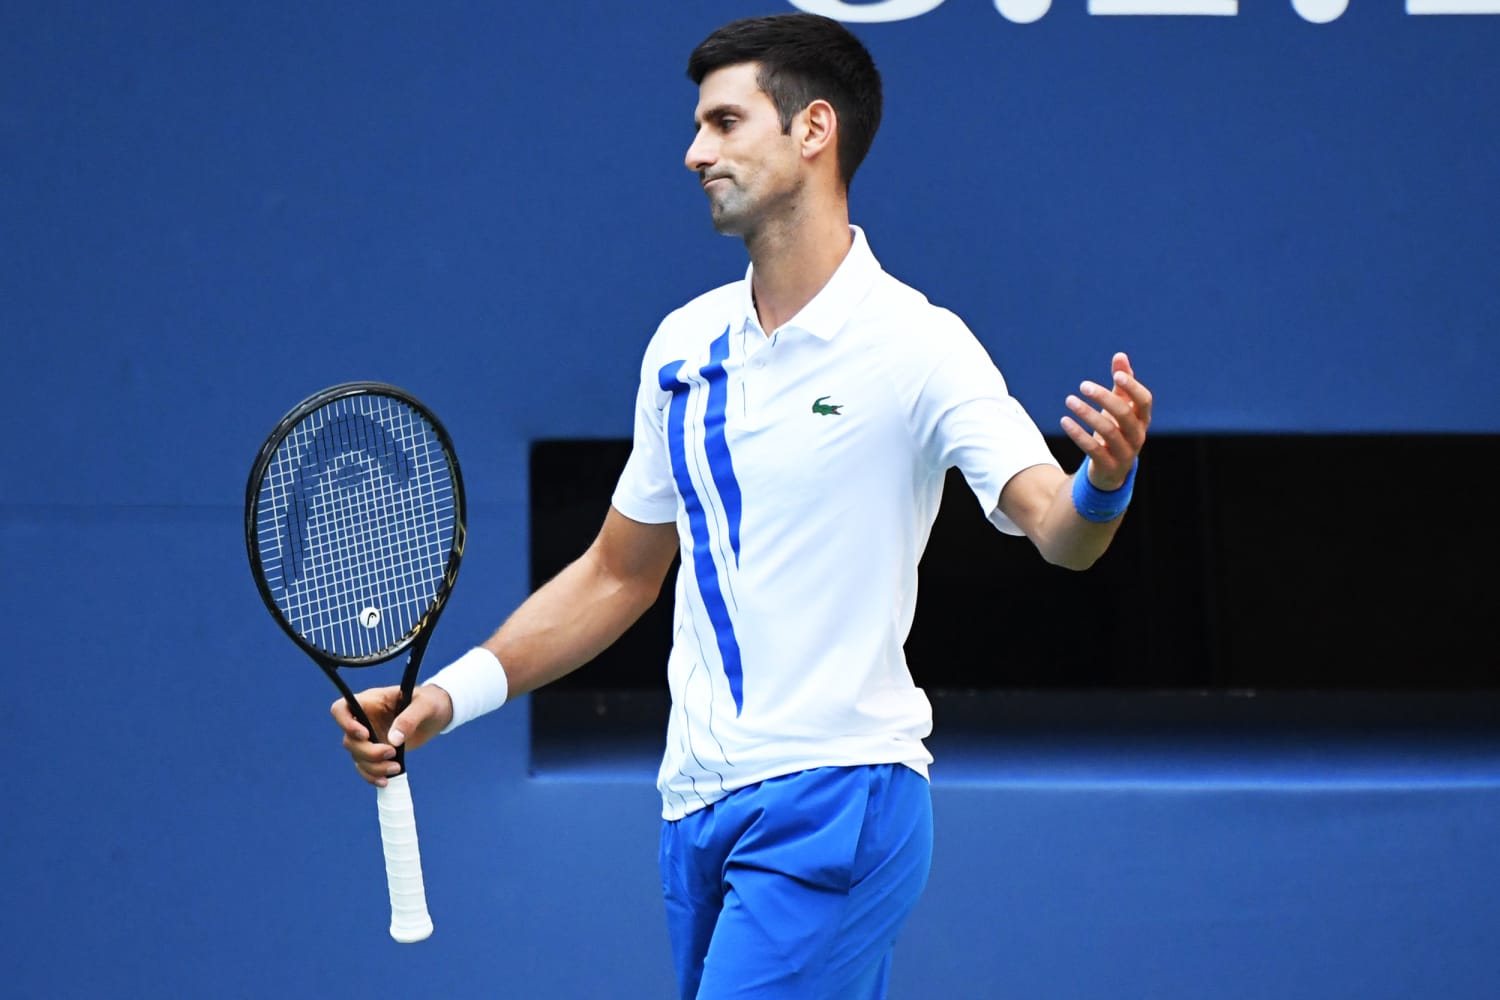 Novak Djokovic disqualified from U.S. Open for hitting line judge with ball